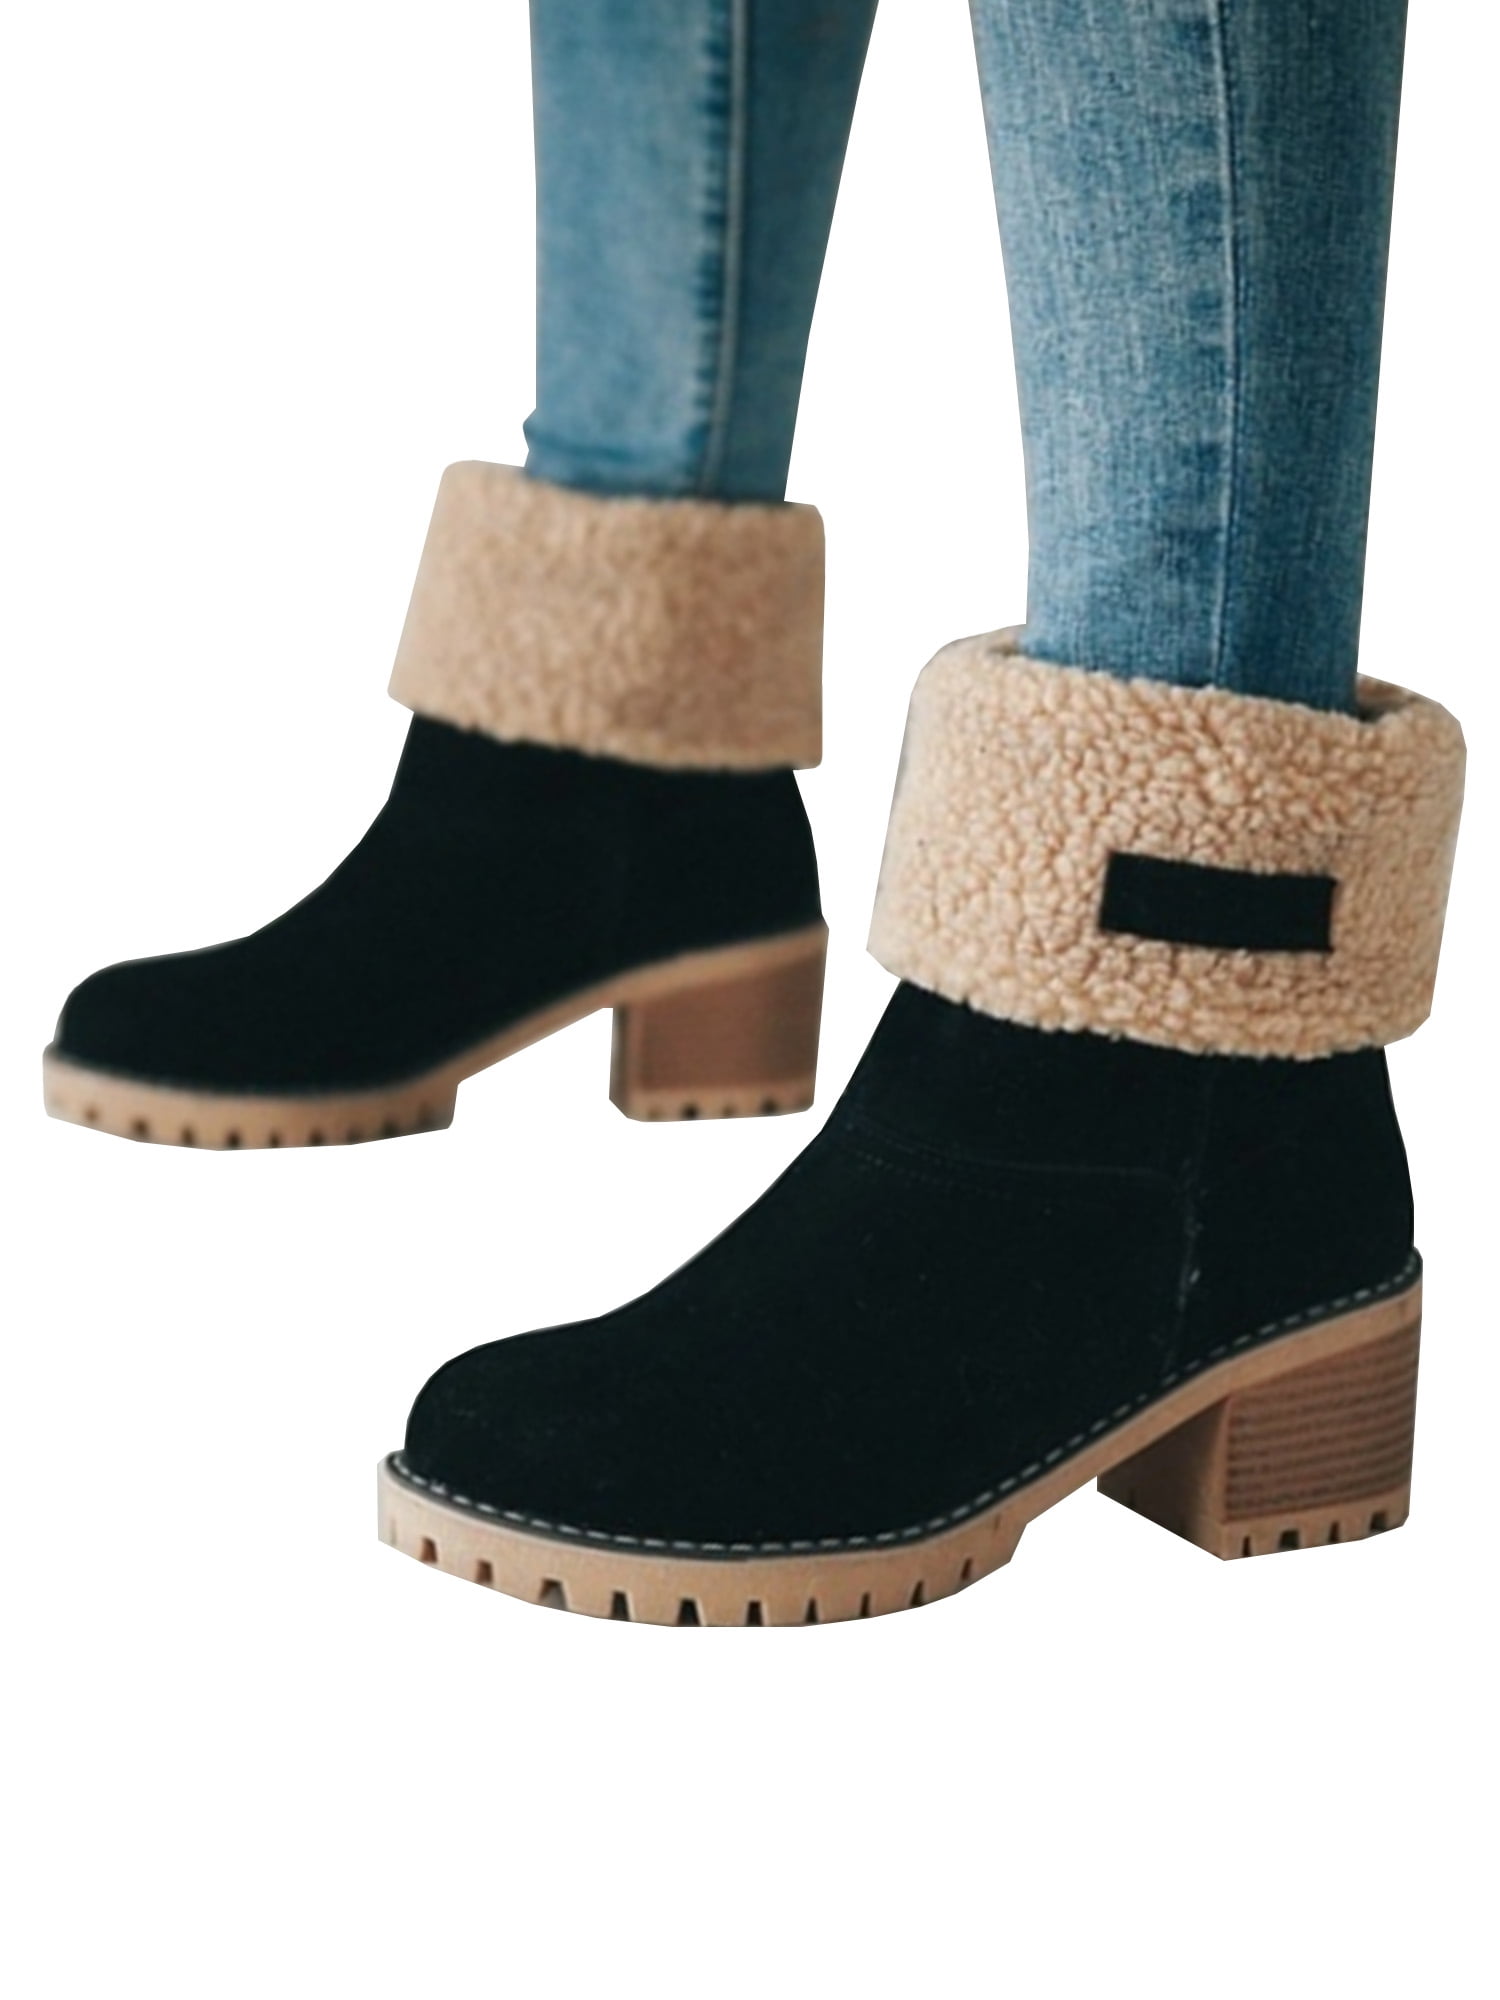 Women Warm Faux Fur Chunky Ankle Boots High Block Heel Buckle Zip Up Plush Shoes 